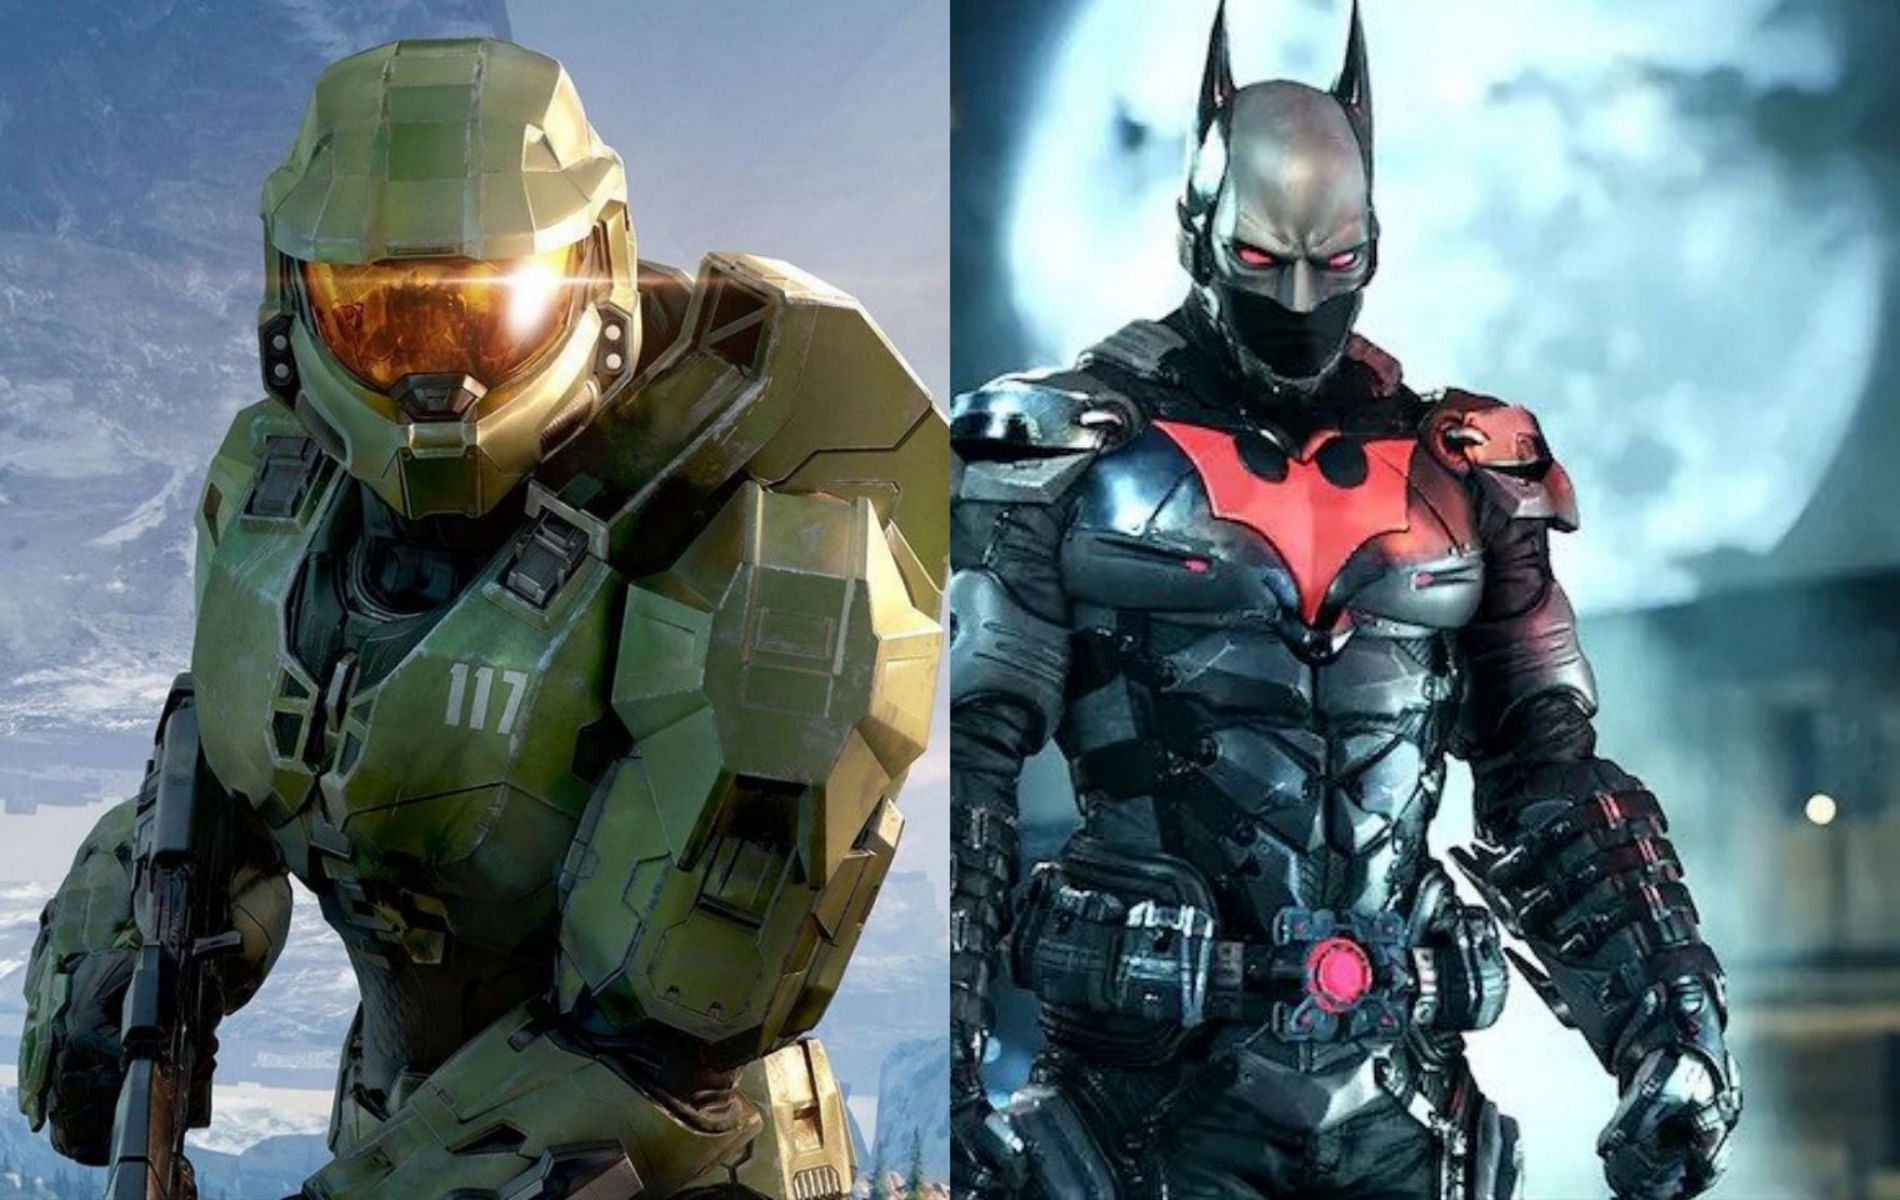 The latest report highlights an exciting array of canceled video games  including Halo, BloodRayne 3, Batman and more